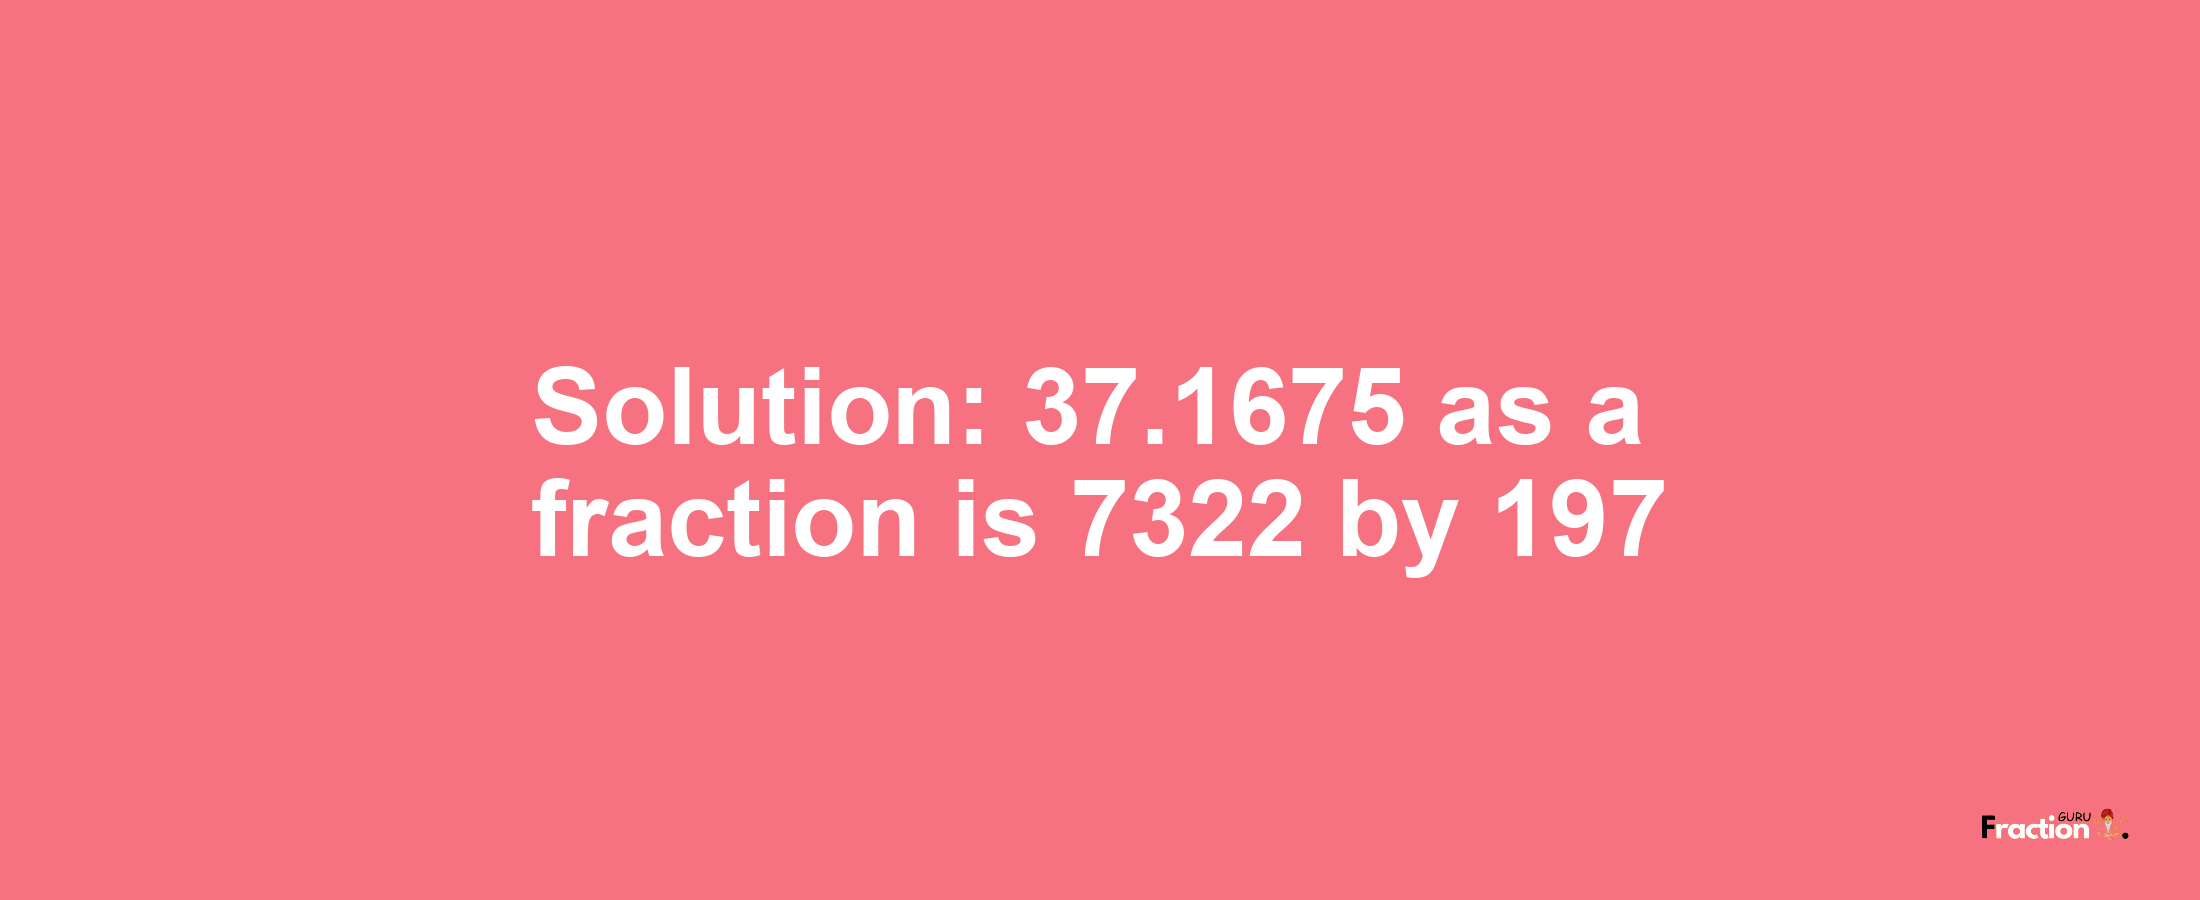 Solution:37.1675 as a fraction is 7322/197